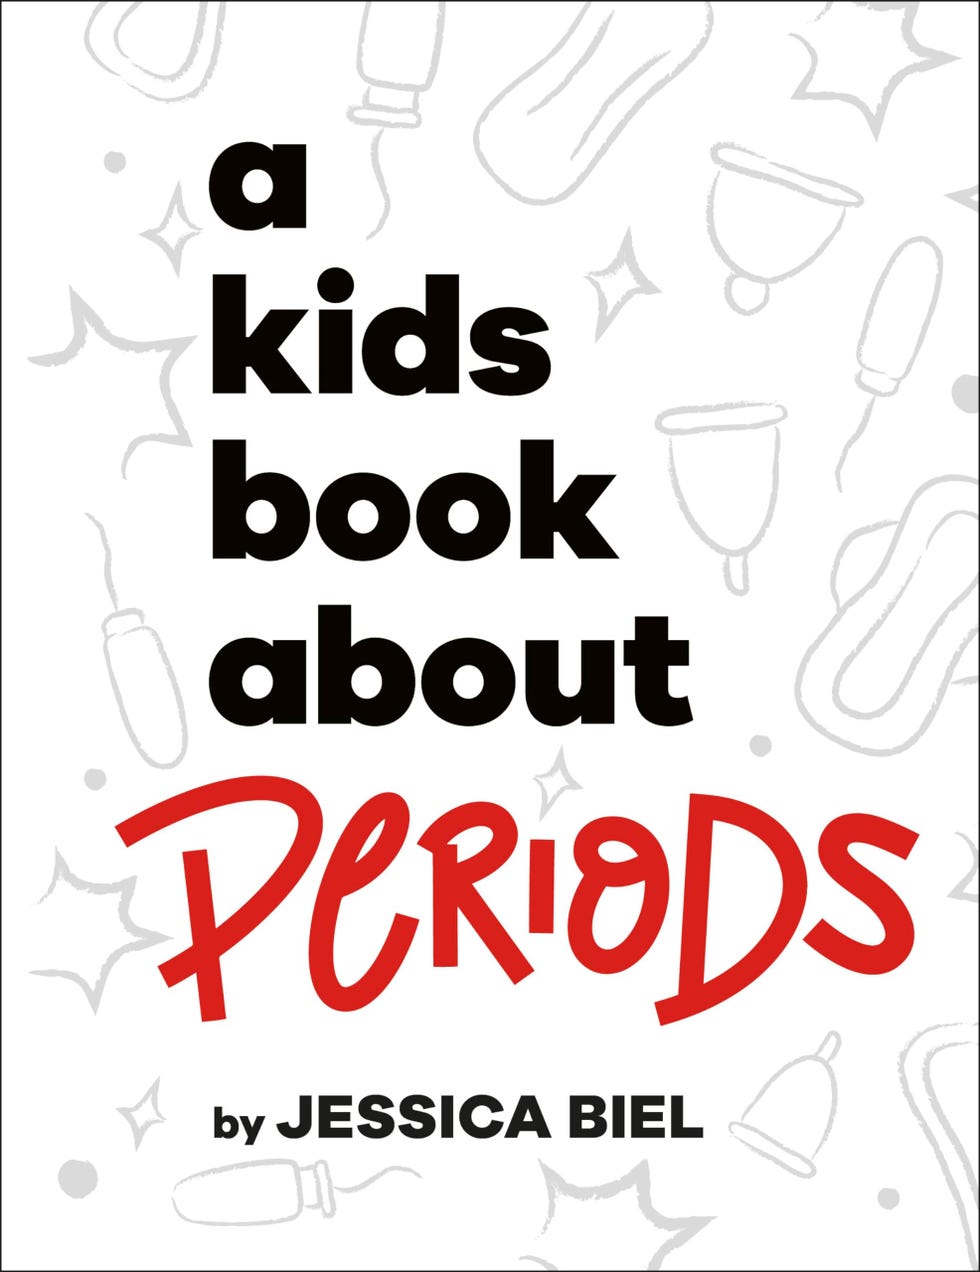 A children's book about periods